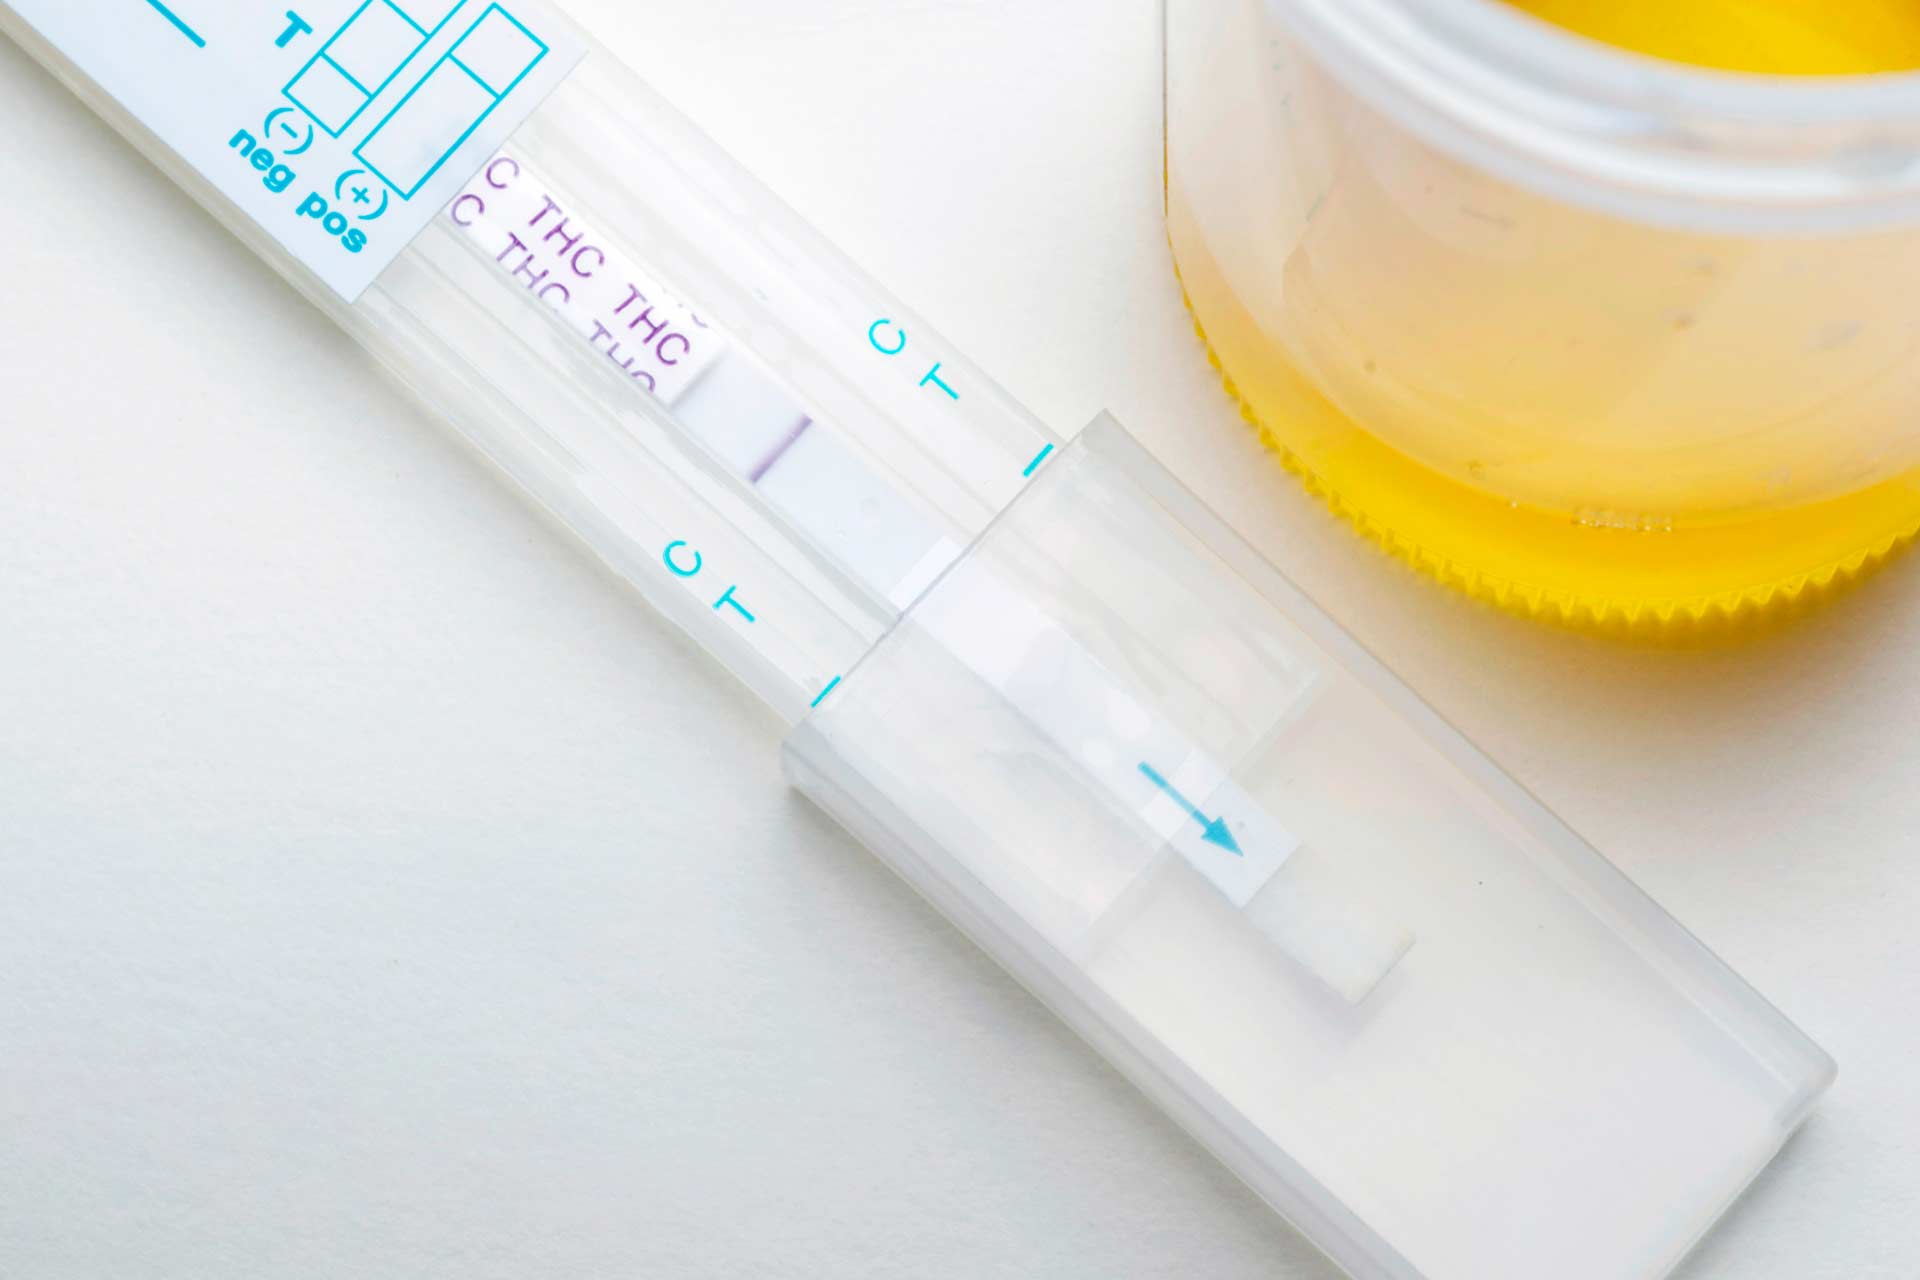 Home drug test for THC, with urine specimen cup beside it.